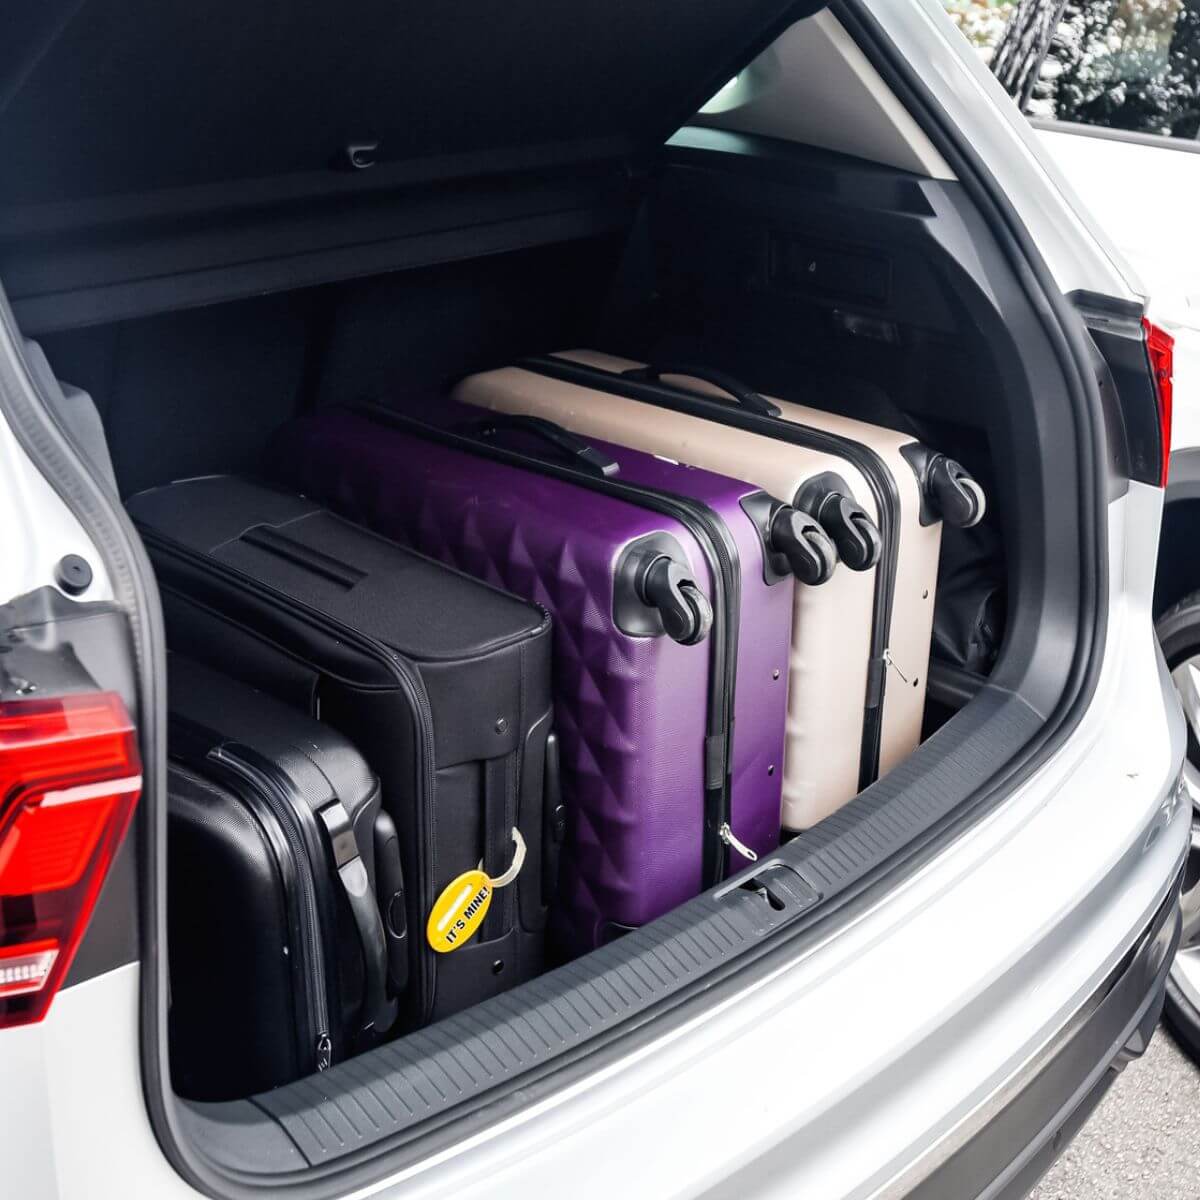 open car boot with suitcases inside